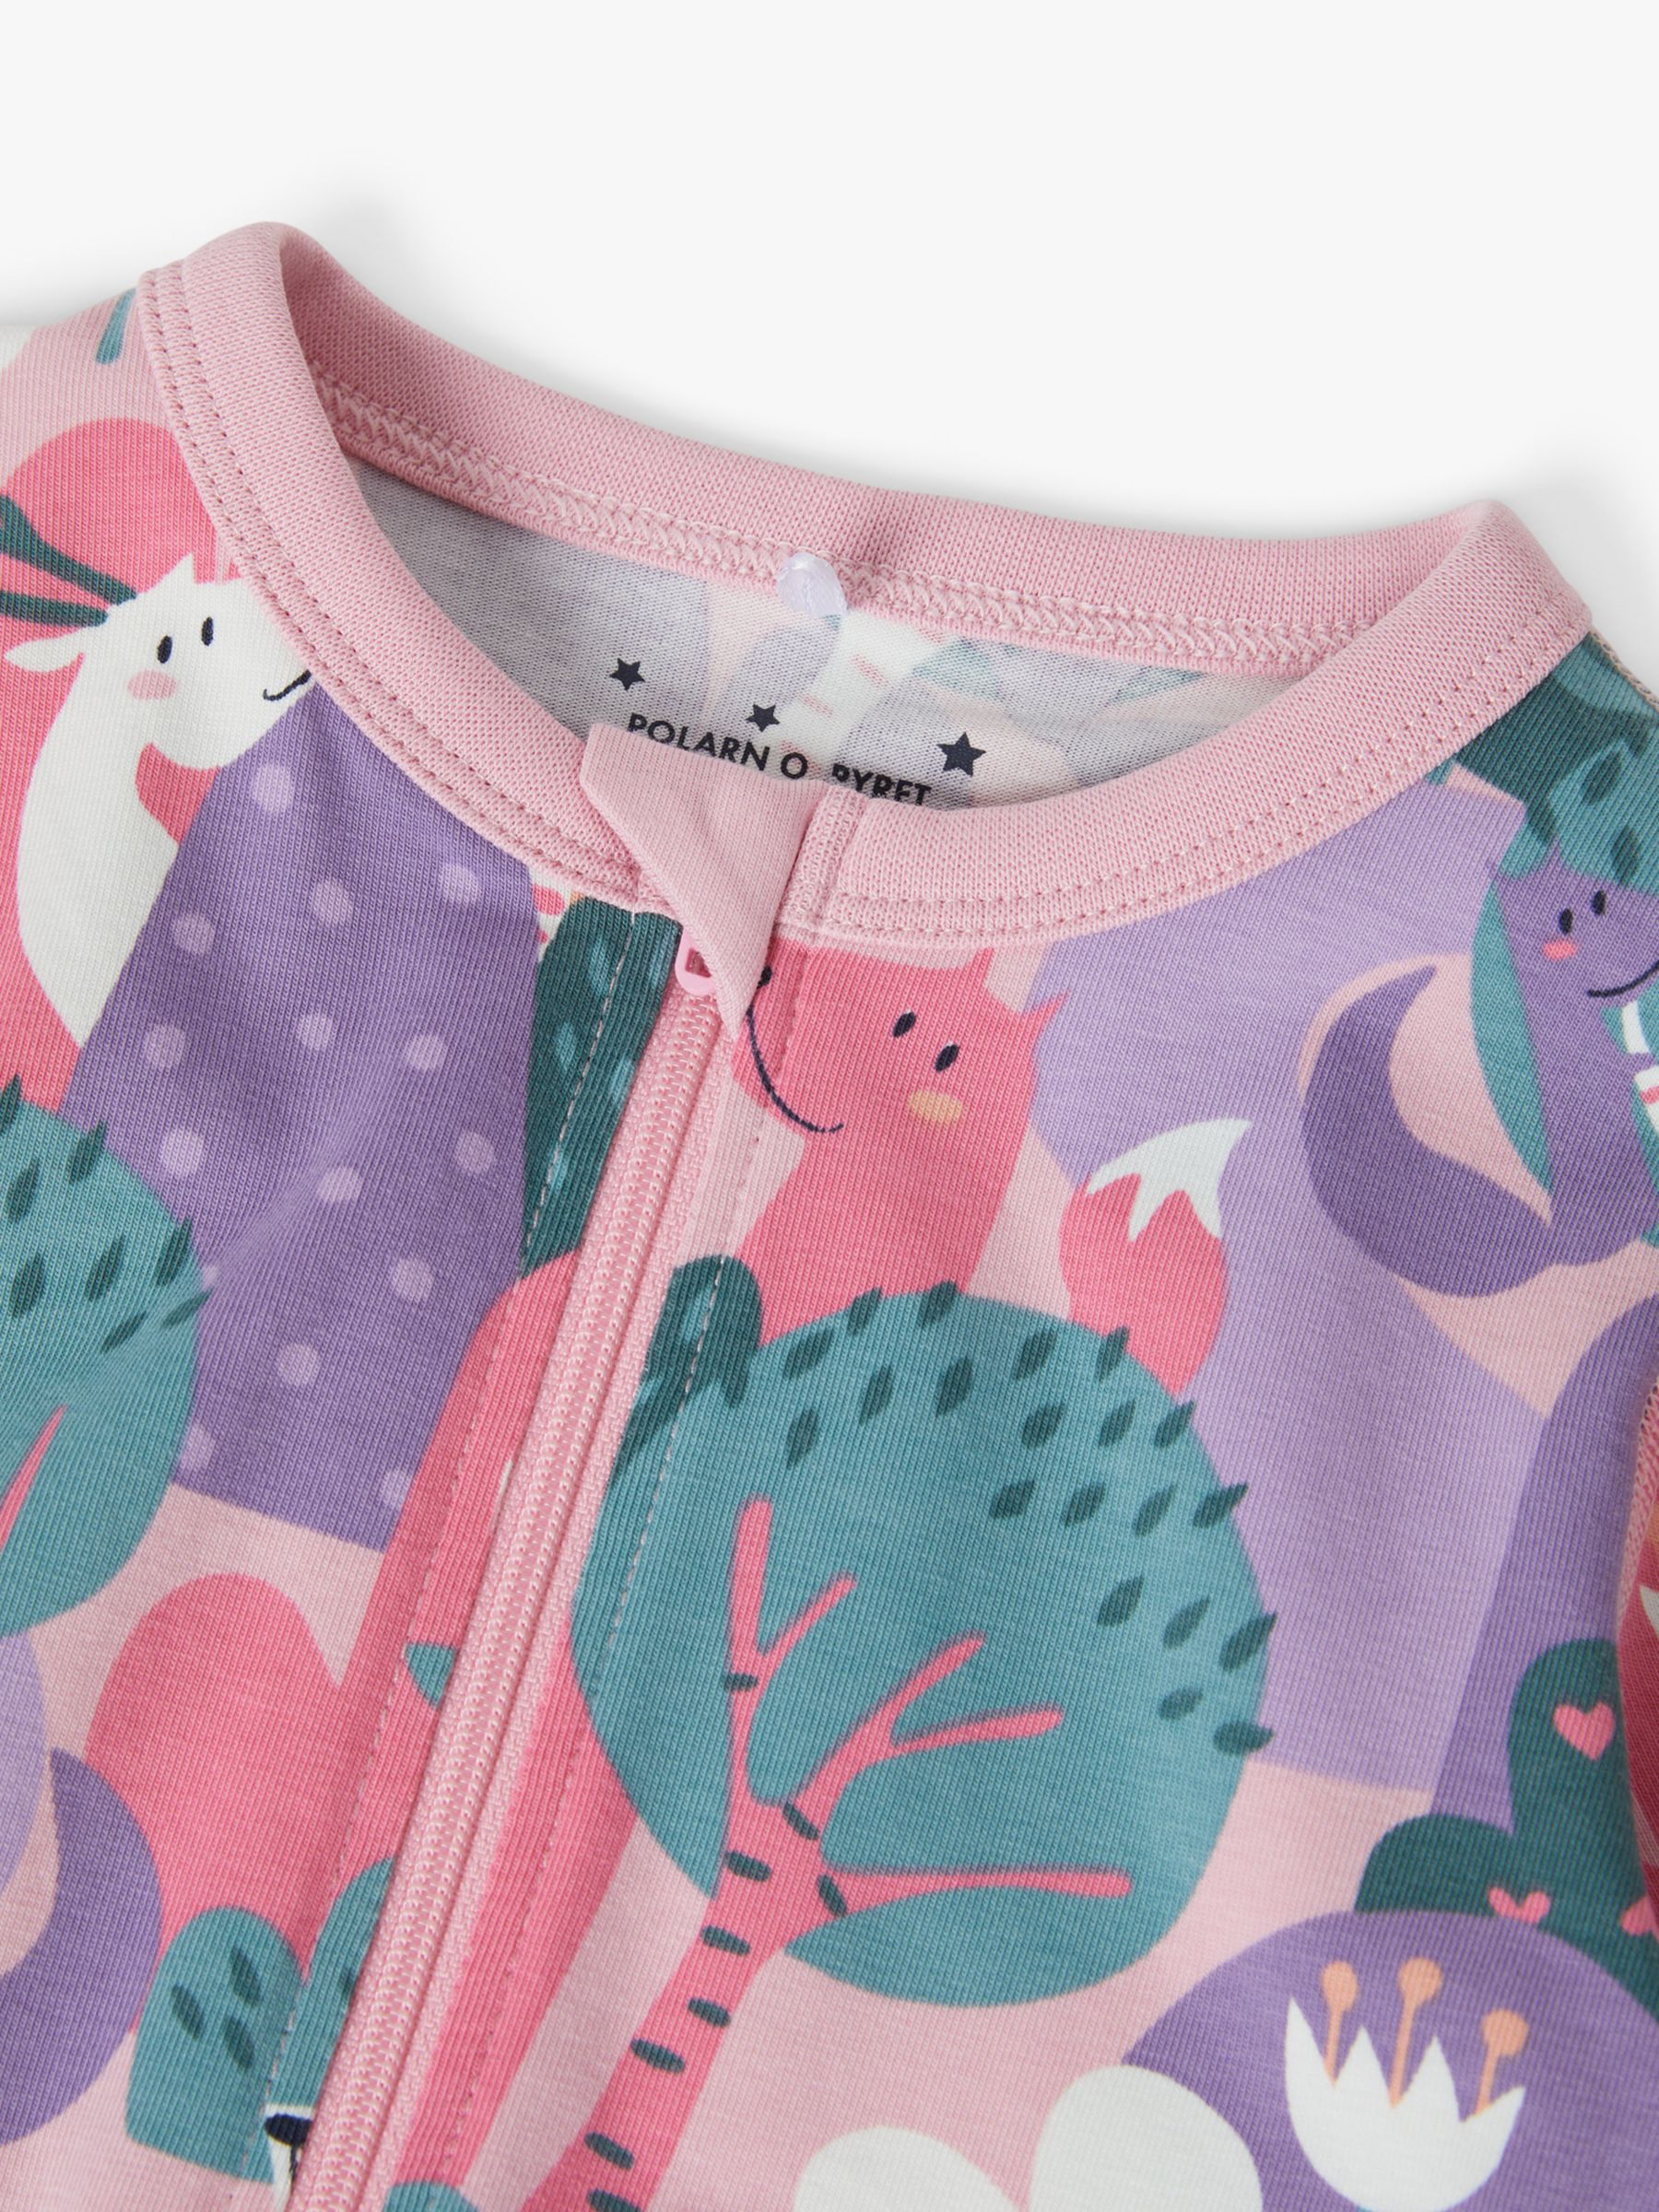 Buy Polarn O. Pyret Baby Organic Cotton Forest Print Onesie, Pink Online at johnlewis.com